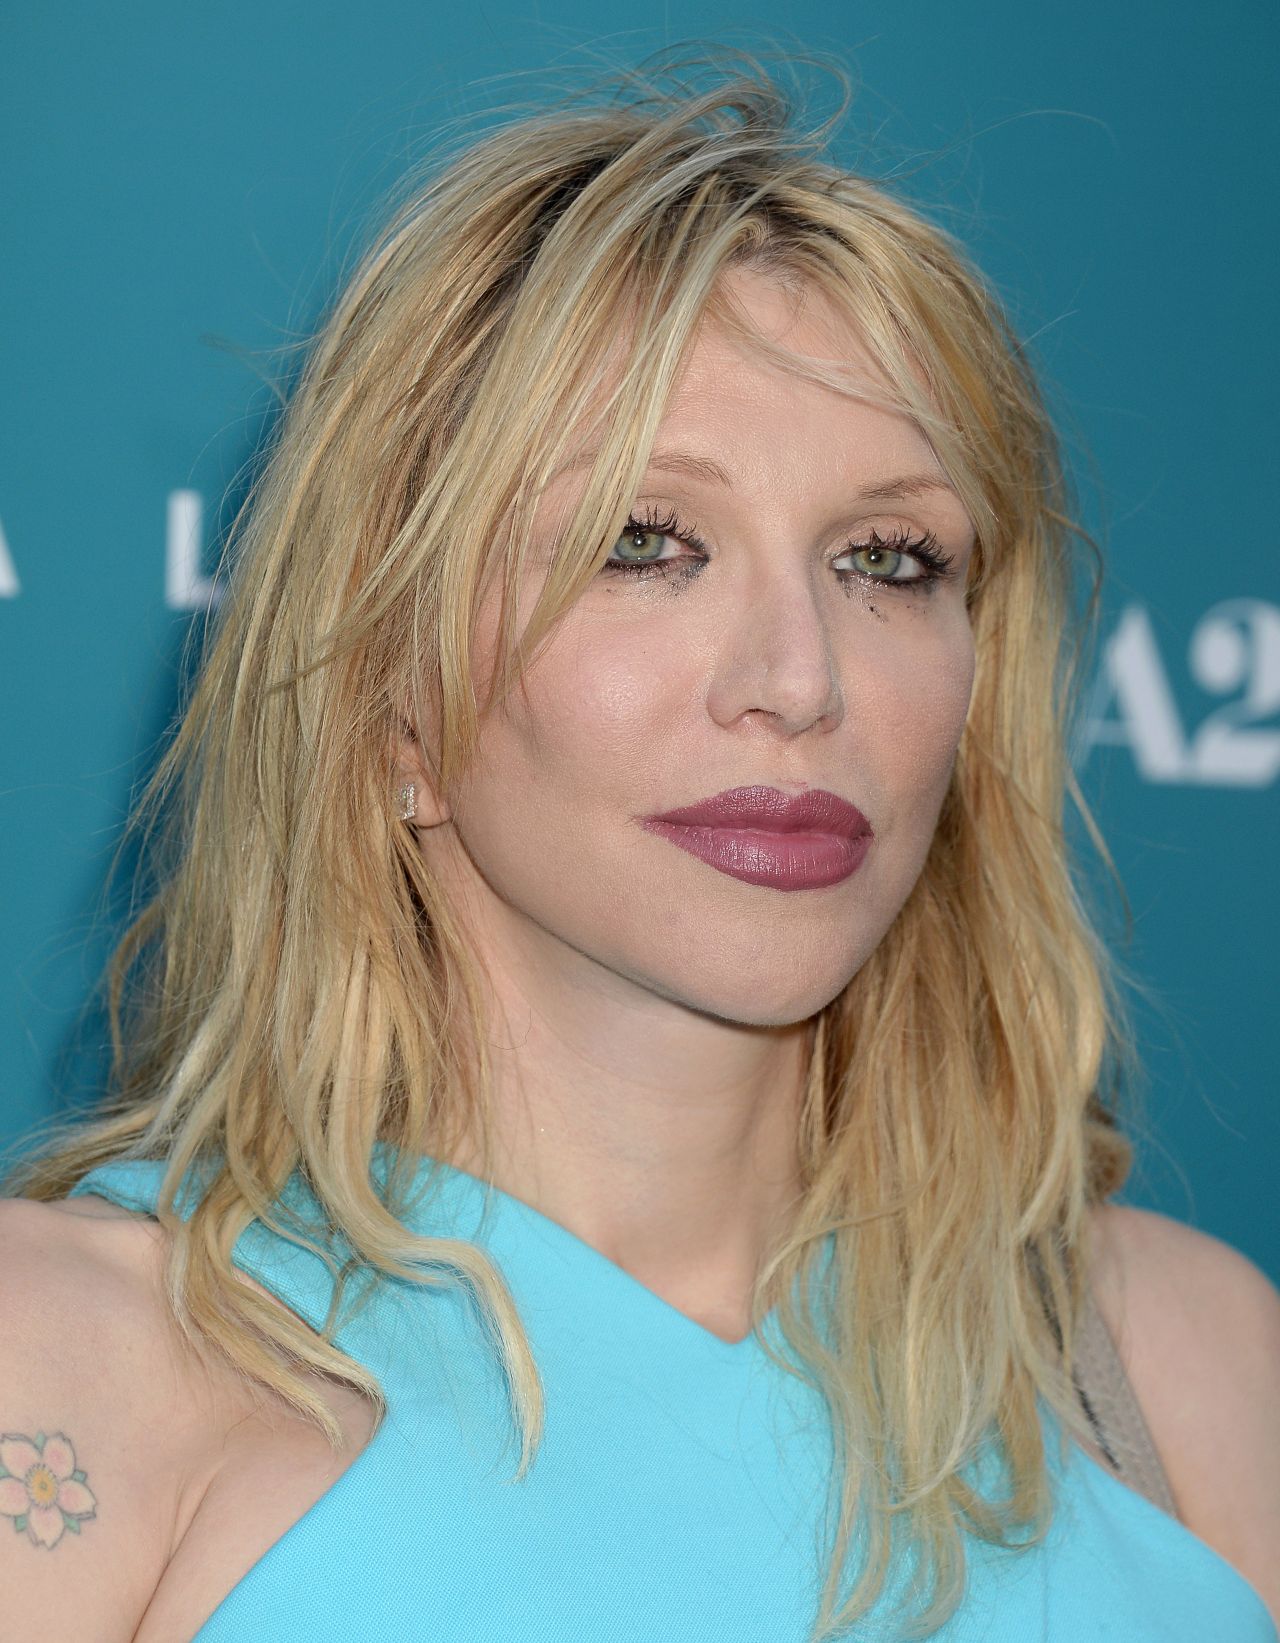 Courtney Love A24 S Equals Premiere At Arclight Hollywood 1 